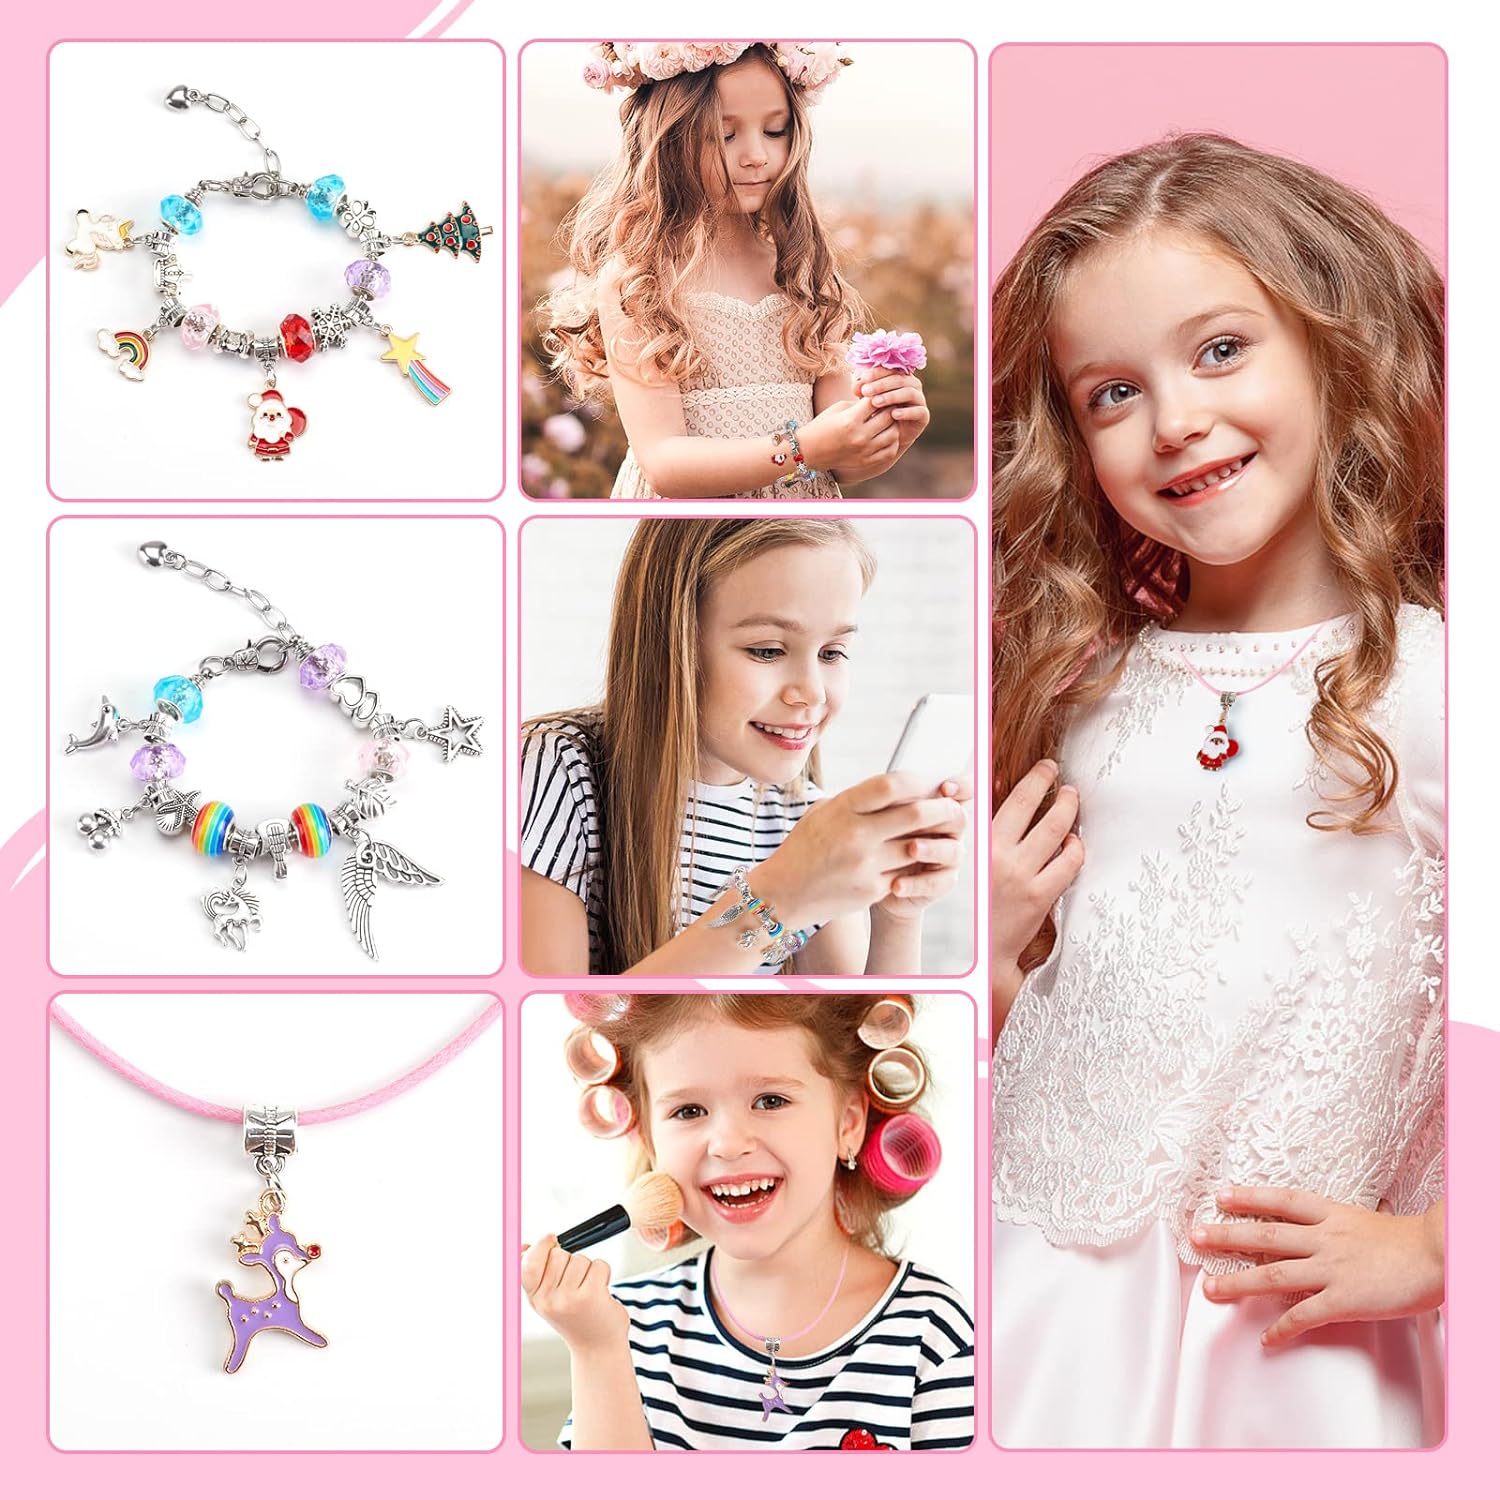 Unicorn Gifts for Girls Toys Age 7-10 Years Old Christmas Gifts Girls Gifts Charm Bracelet Jewellery Making Kit